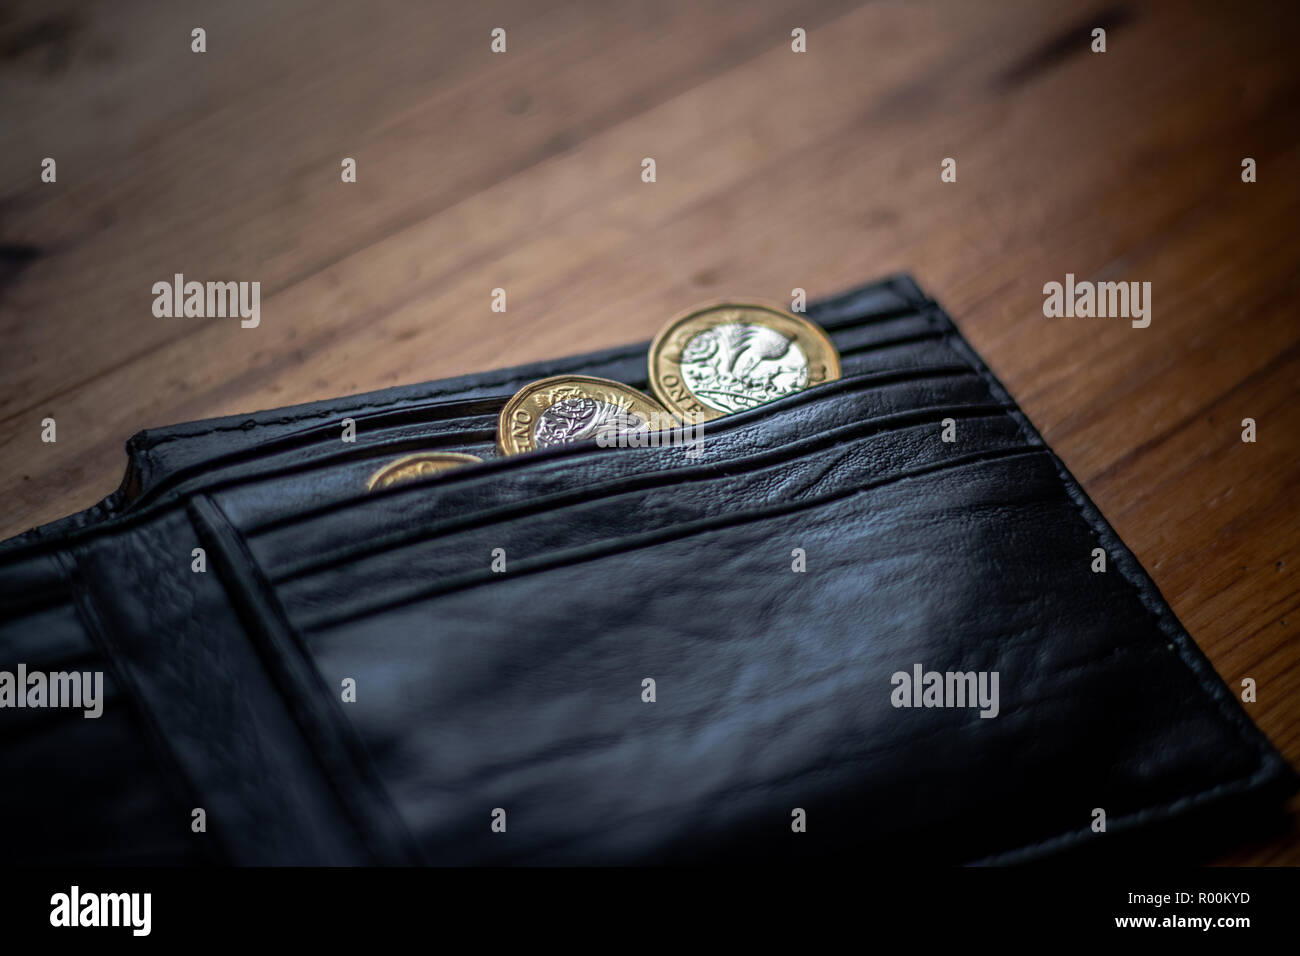 New Great British Pound GBP Coins laying casually on top of black wallet on wooden surface. Wealth, Money, Cash, Change. Stock Photo